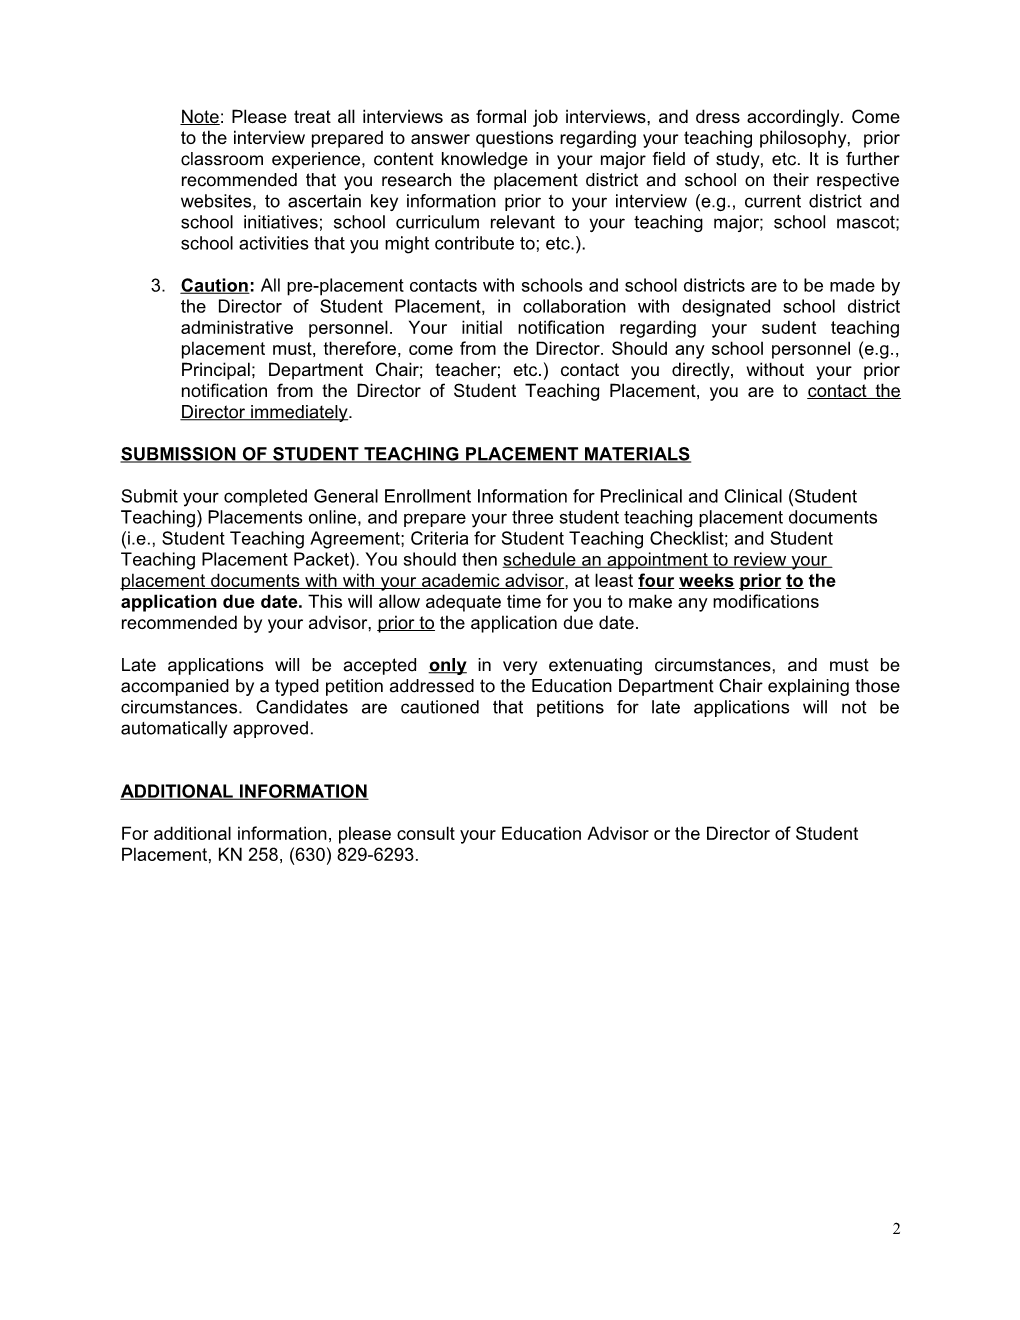 Student Teaching Application and Placement Information